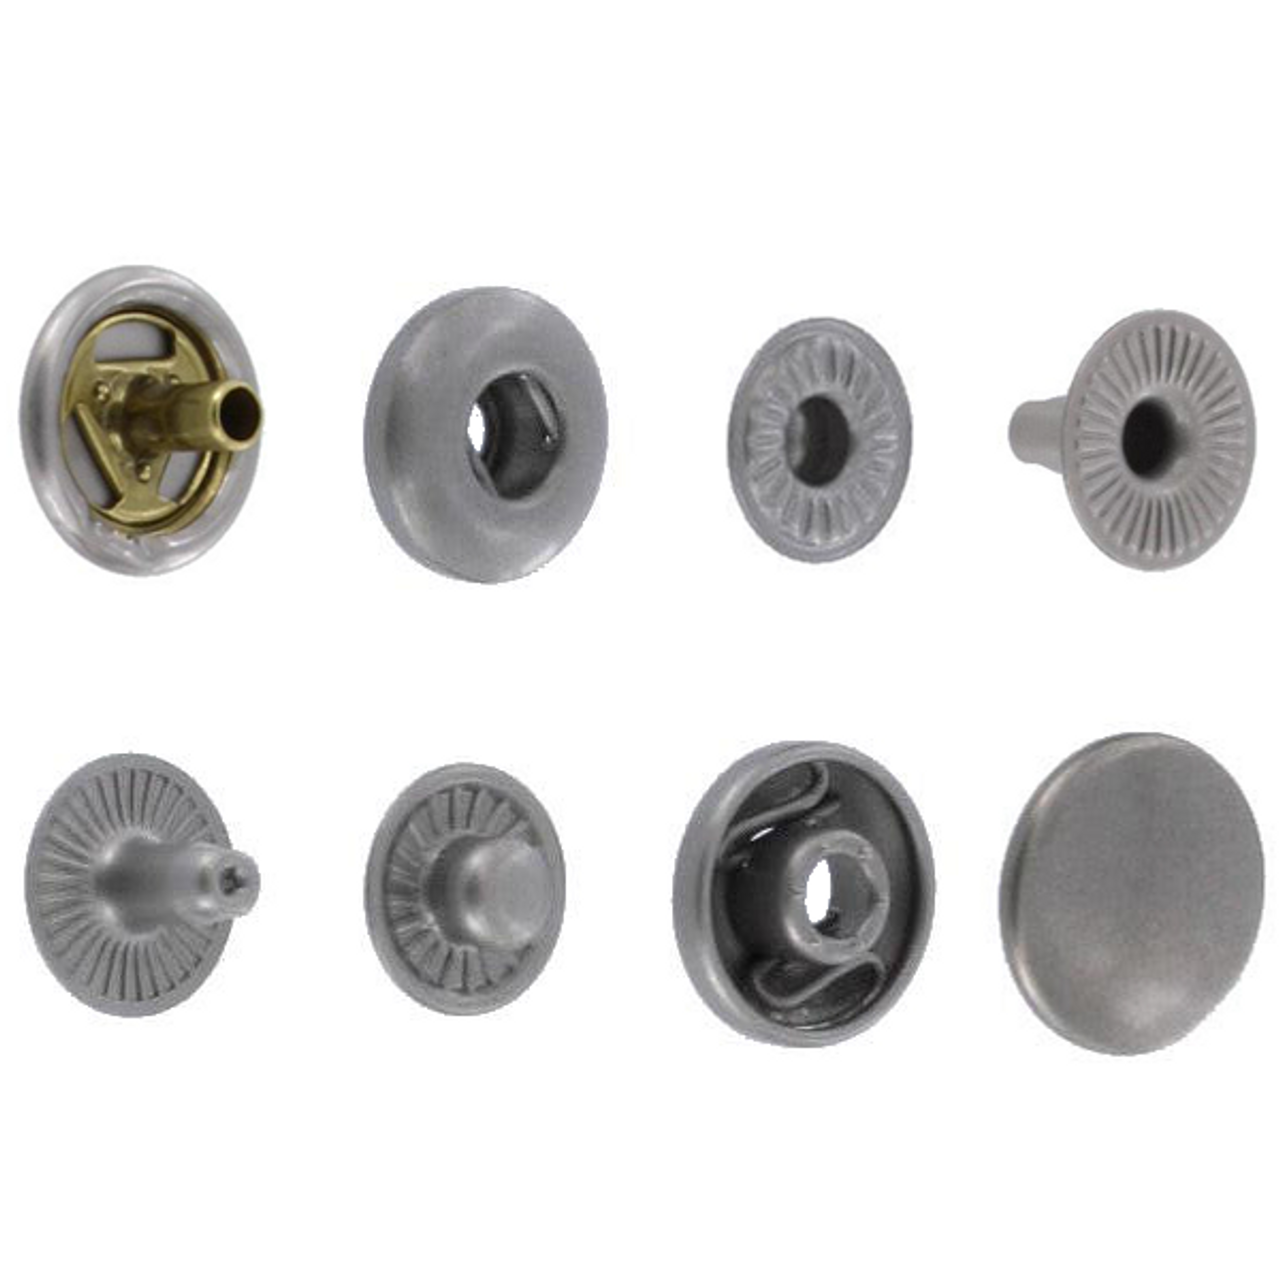 12 Packs: 7 ct. (84 total) Snap Fasteners by Loops & Threads™